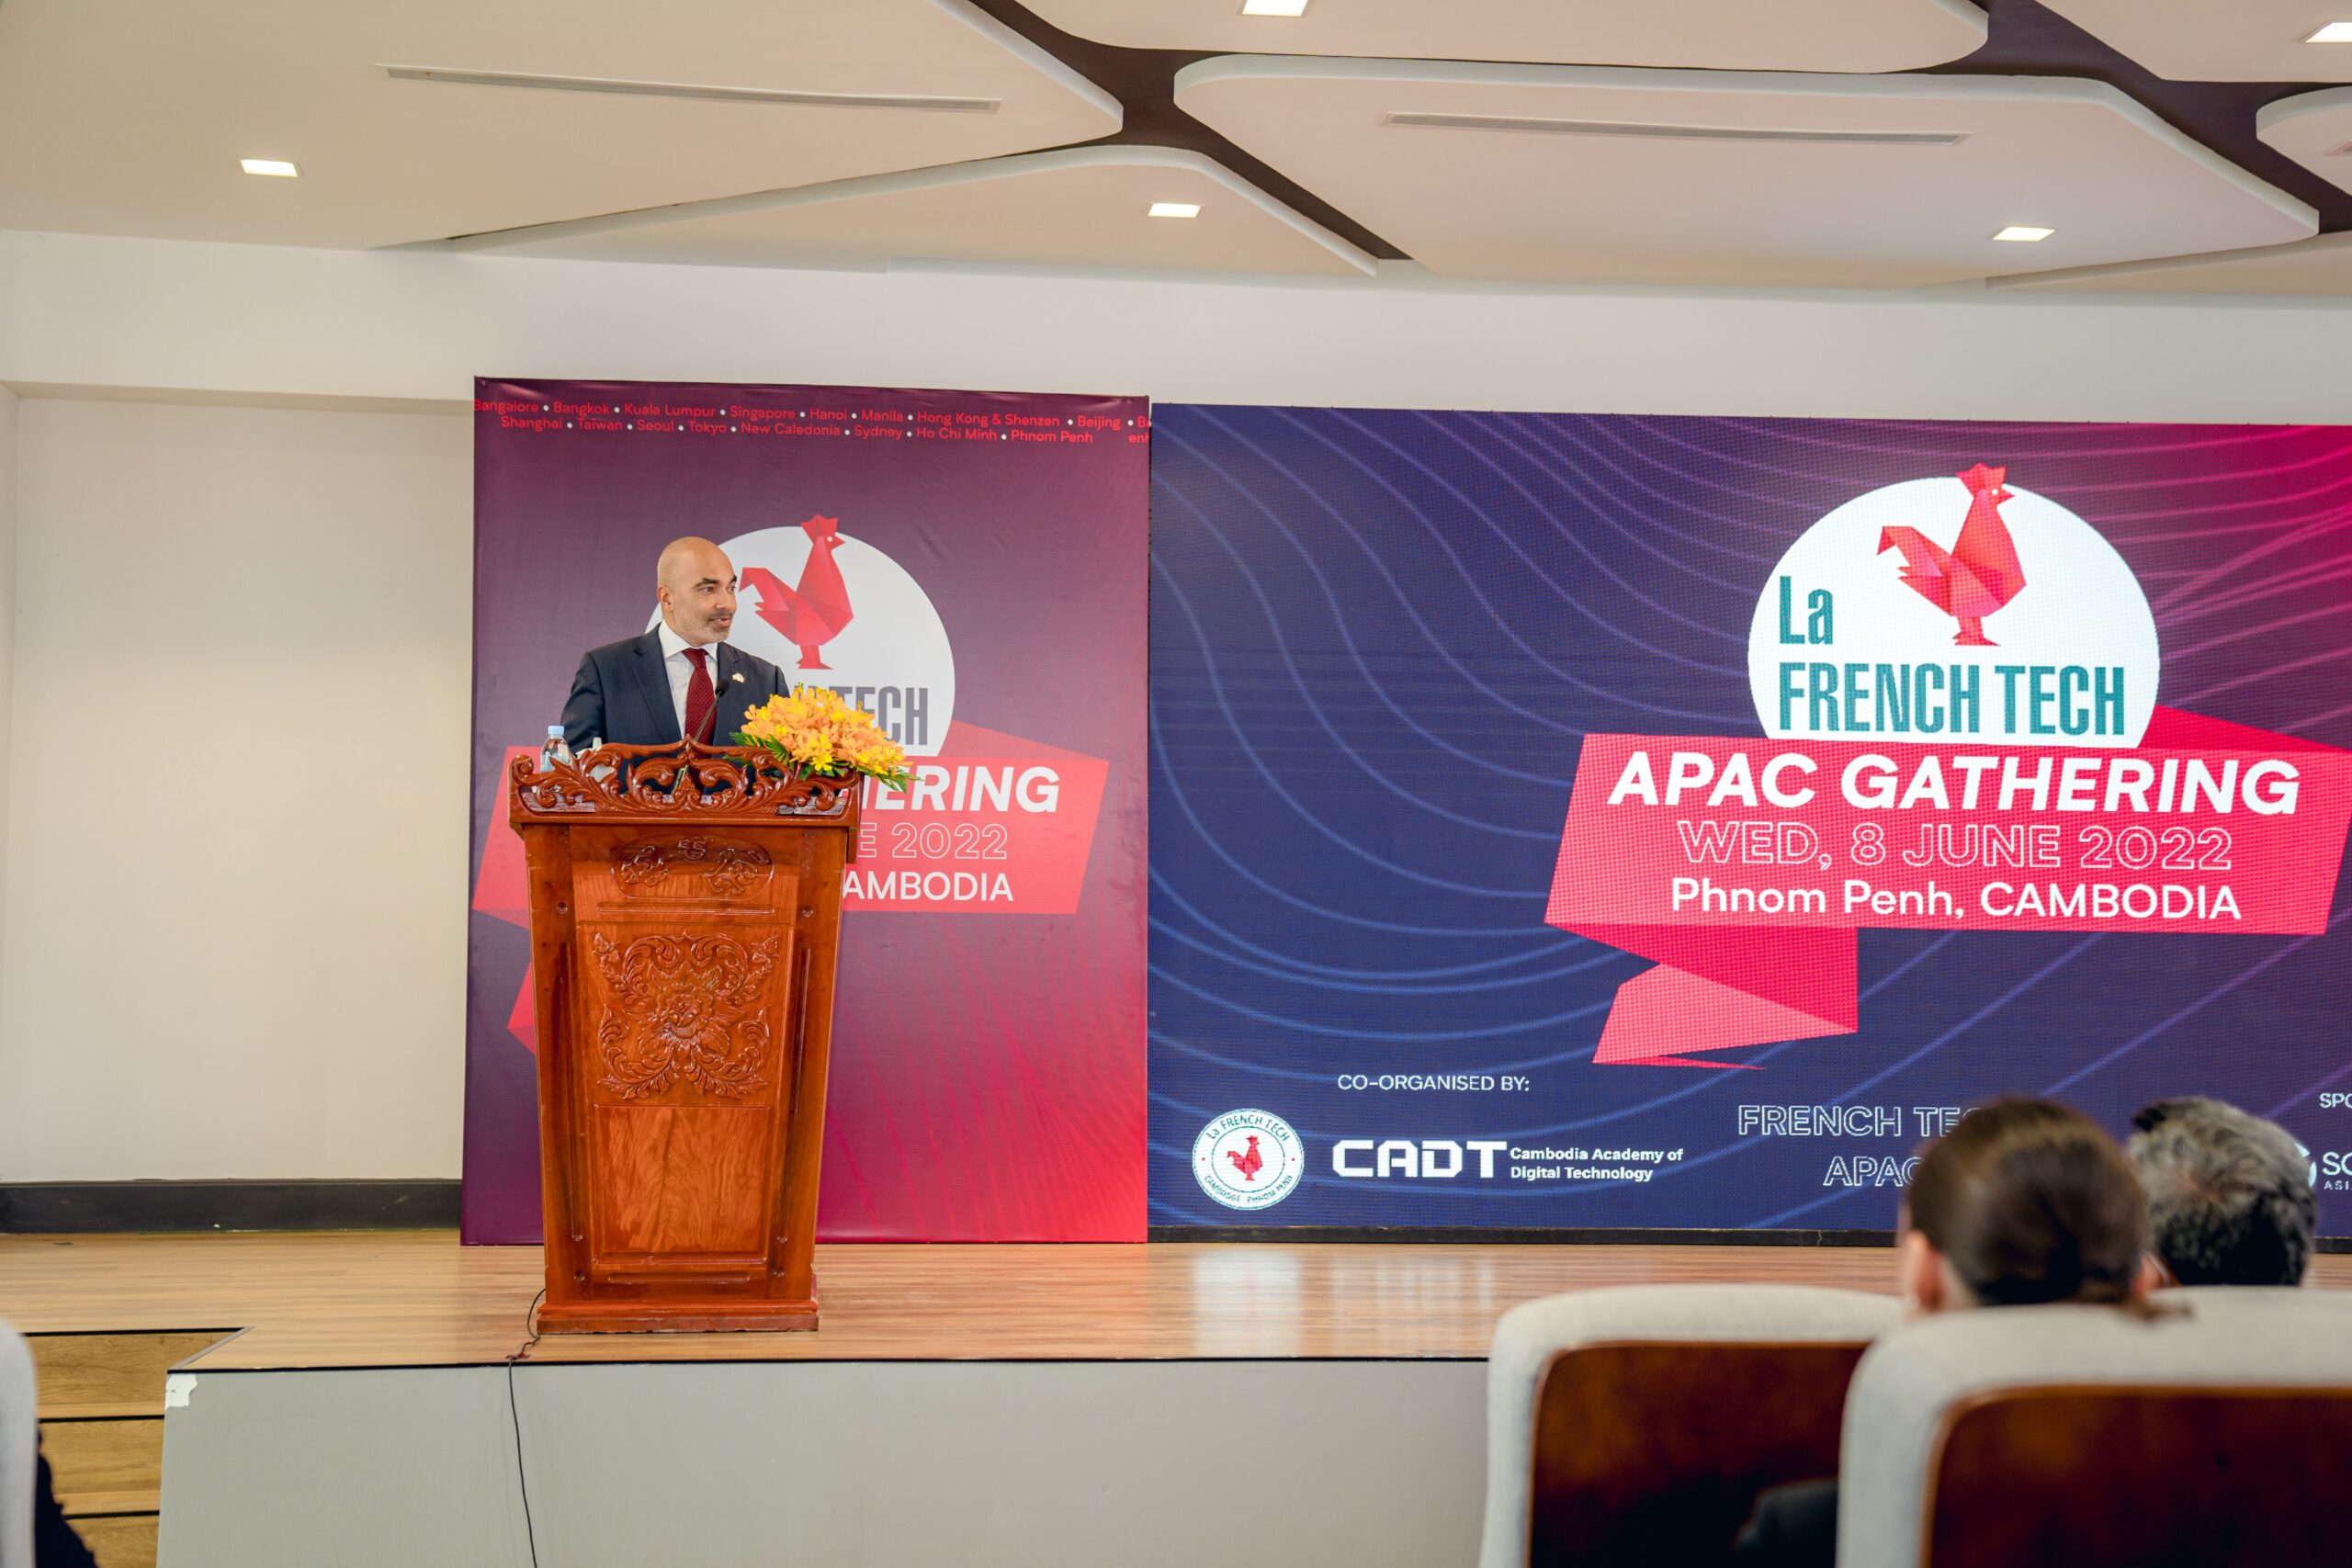 CADT & La FRENCH TECH TO CO-ORGANIZED THE APAC GATHERING